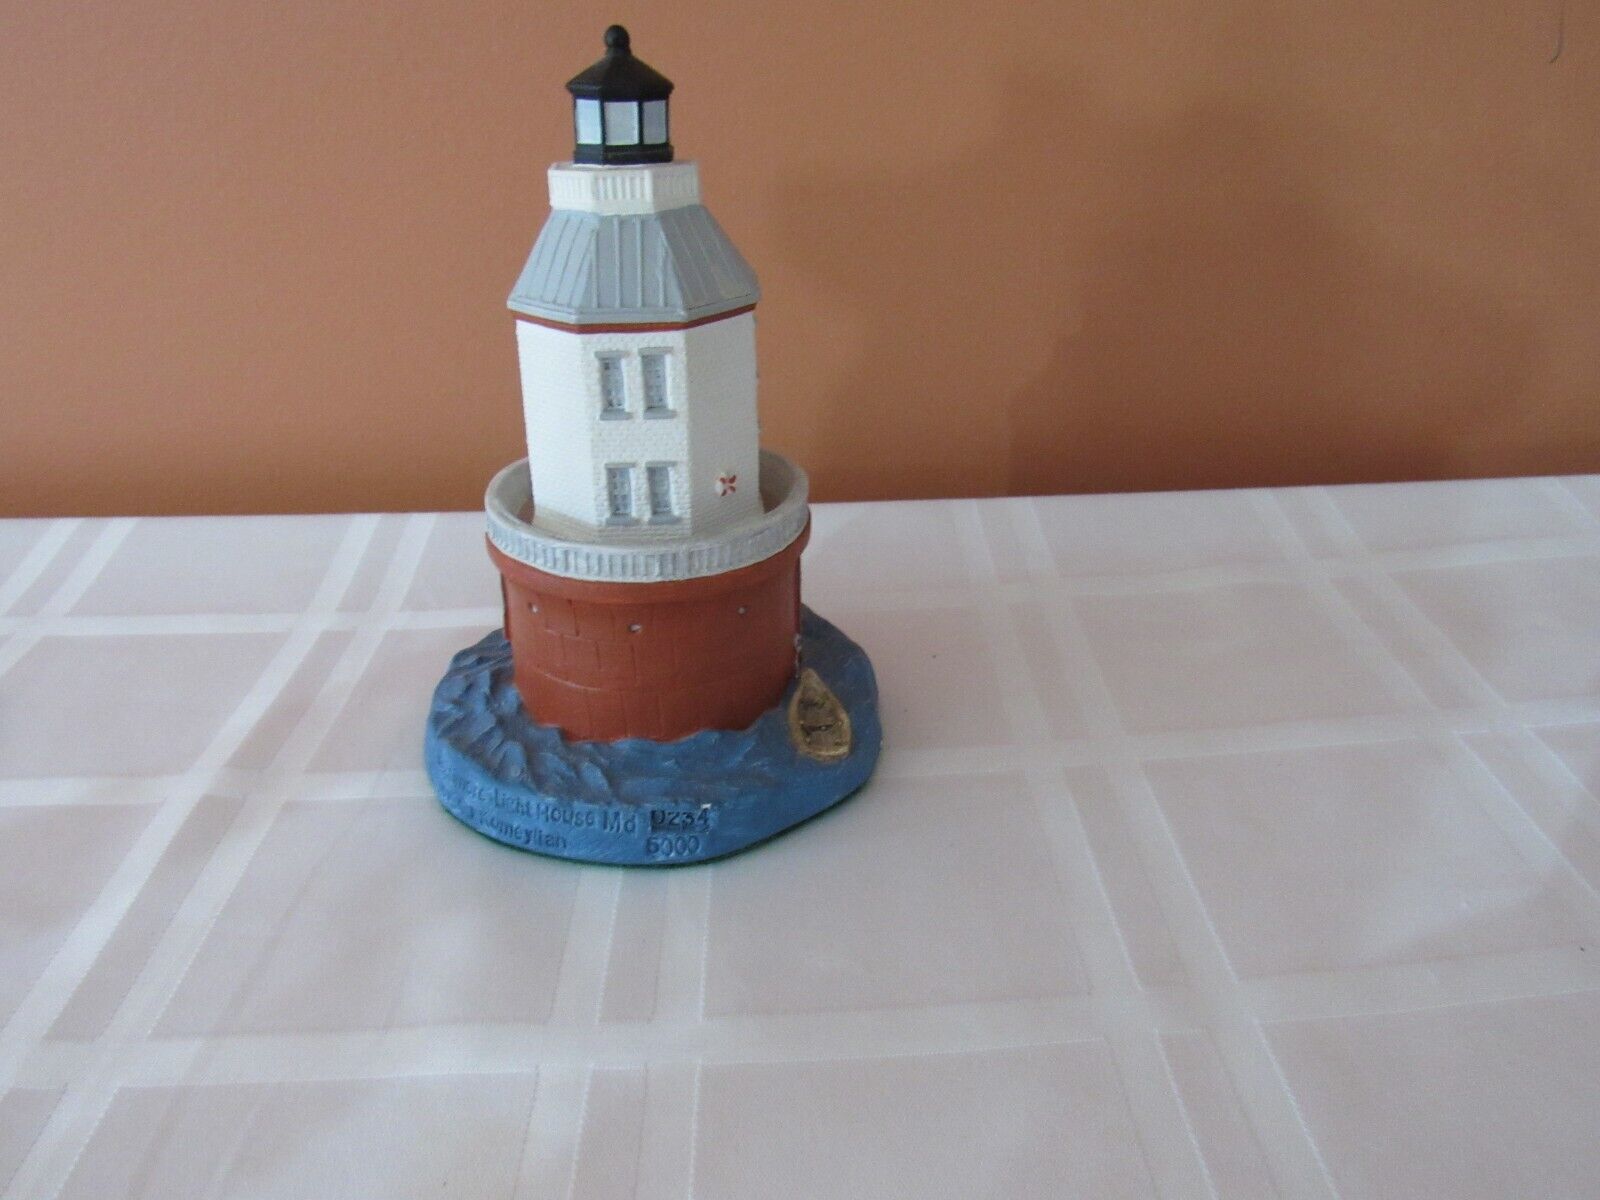 Collectable Baltimore Light House 1994 Lighthouse Sculpture by Jeff Komeylian